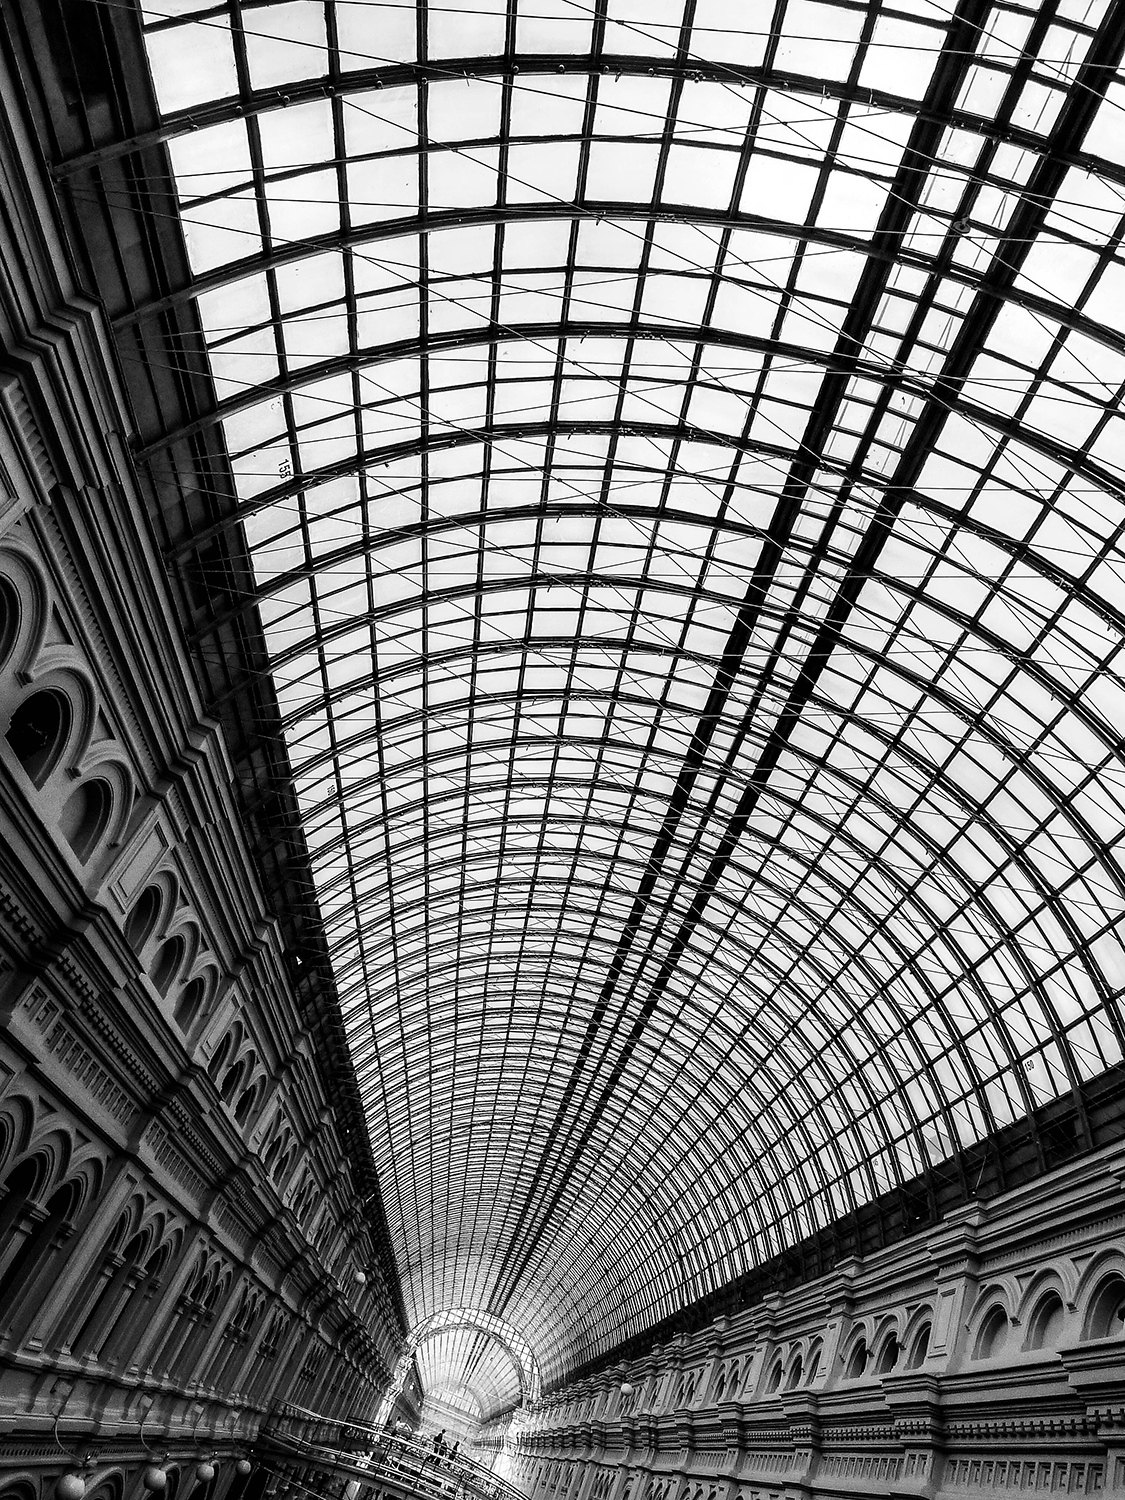 <p>Moscow's GUM runs the length of one side of Red Square. It dates from the late 19th Century, and was designed by Alexander Pomerantsev and Vladimir Shukhov. Shukhov in particular engineered this stunning glass roof, which covers several storeys of passages and created a climate-controlled shopping experience long before the suburban shopping mall concept. <br /></p><p>The name GUM, which stands for Main Universal Store (Главный универсальный магазин), was given to the facility during the Soviet period, and has stuck around since. Today, it really is a shopping mall – but with some serious architectural pedigree. </p>